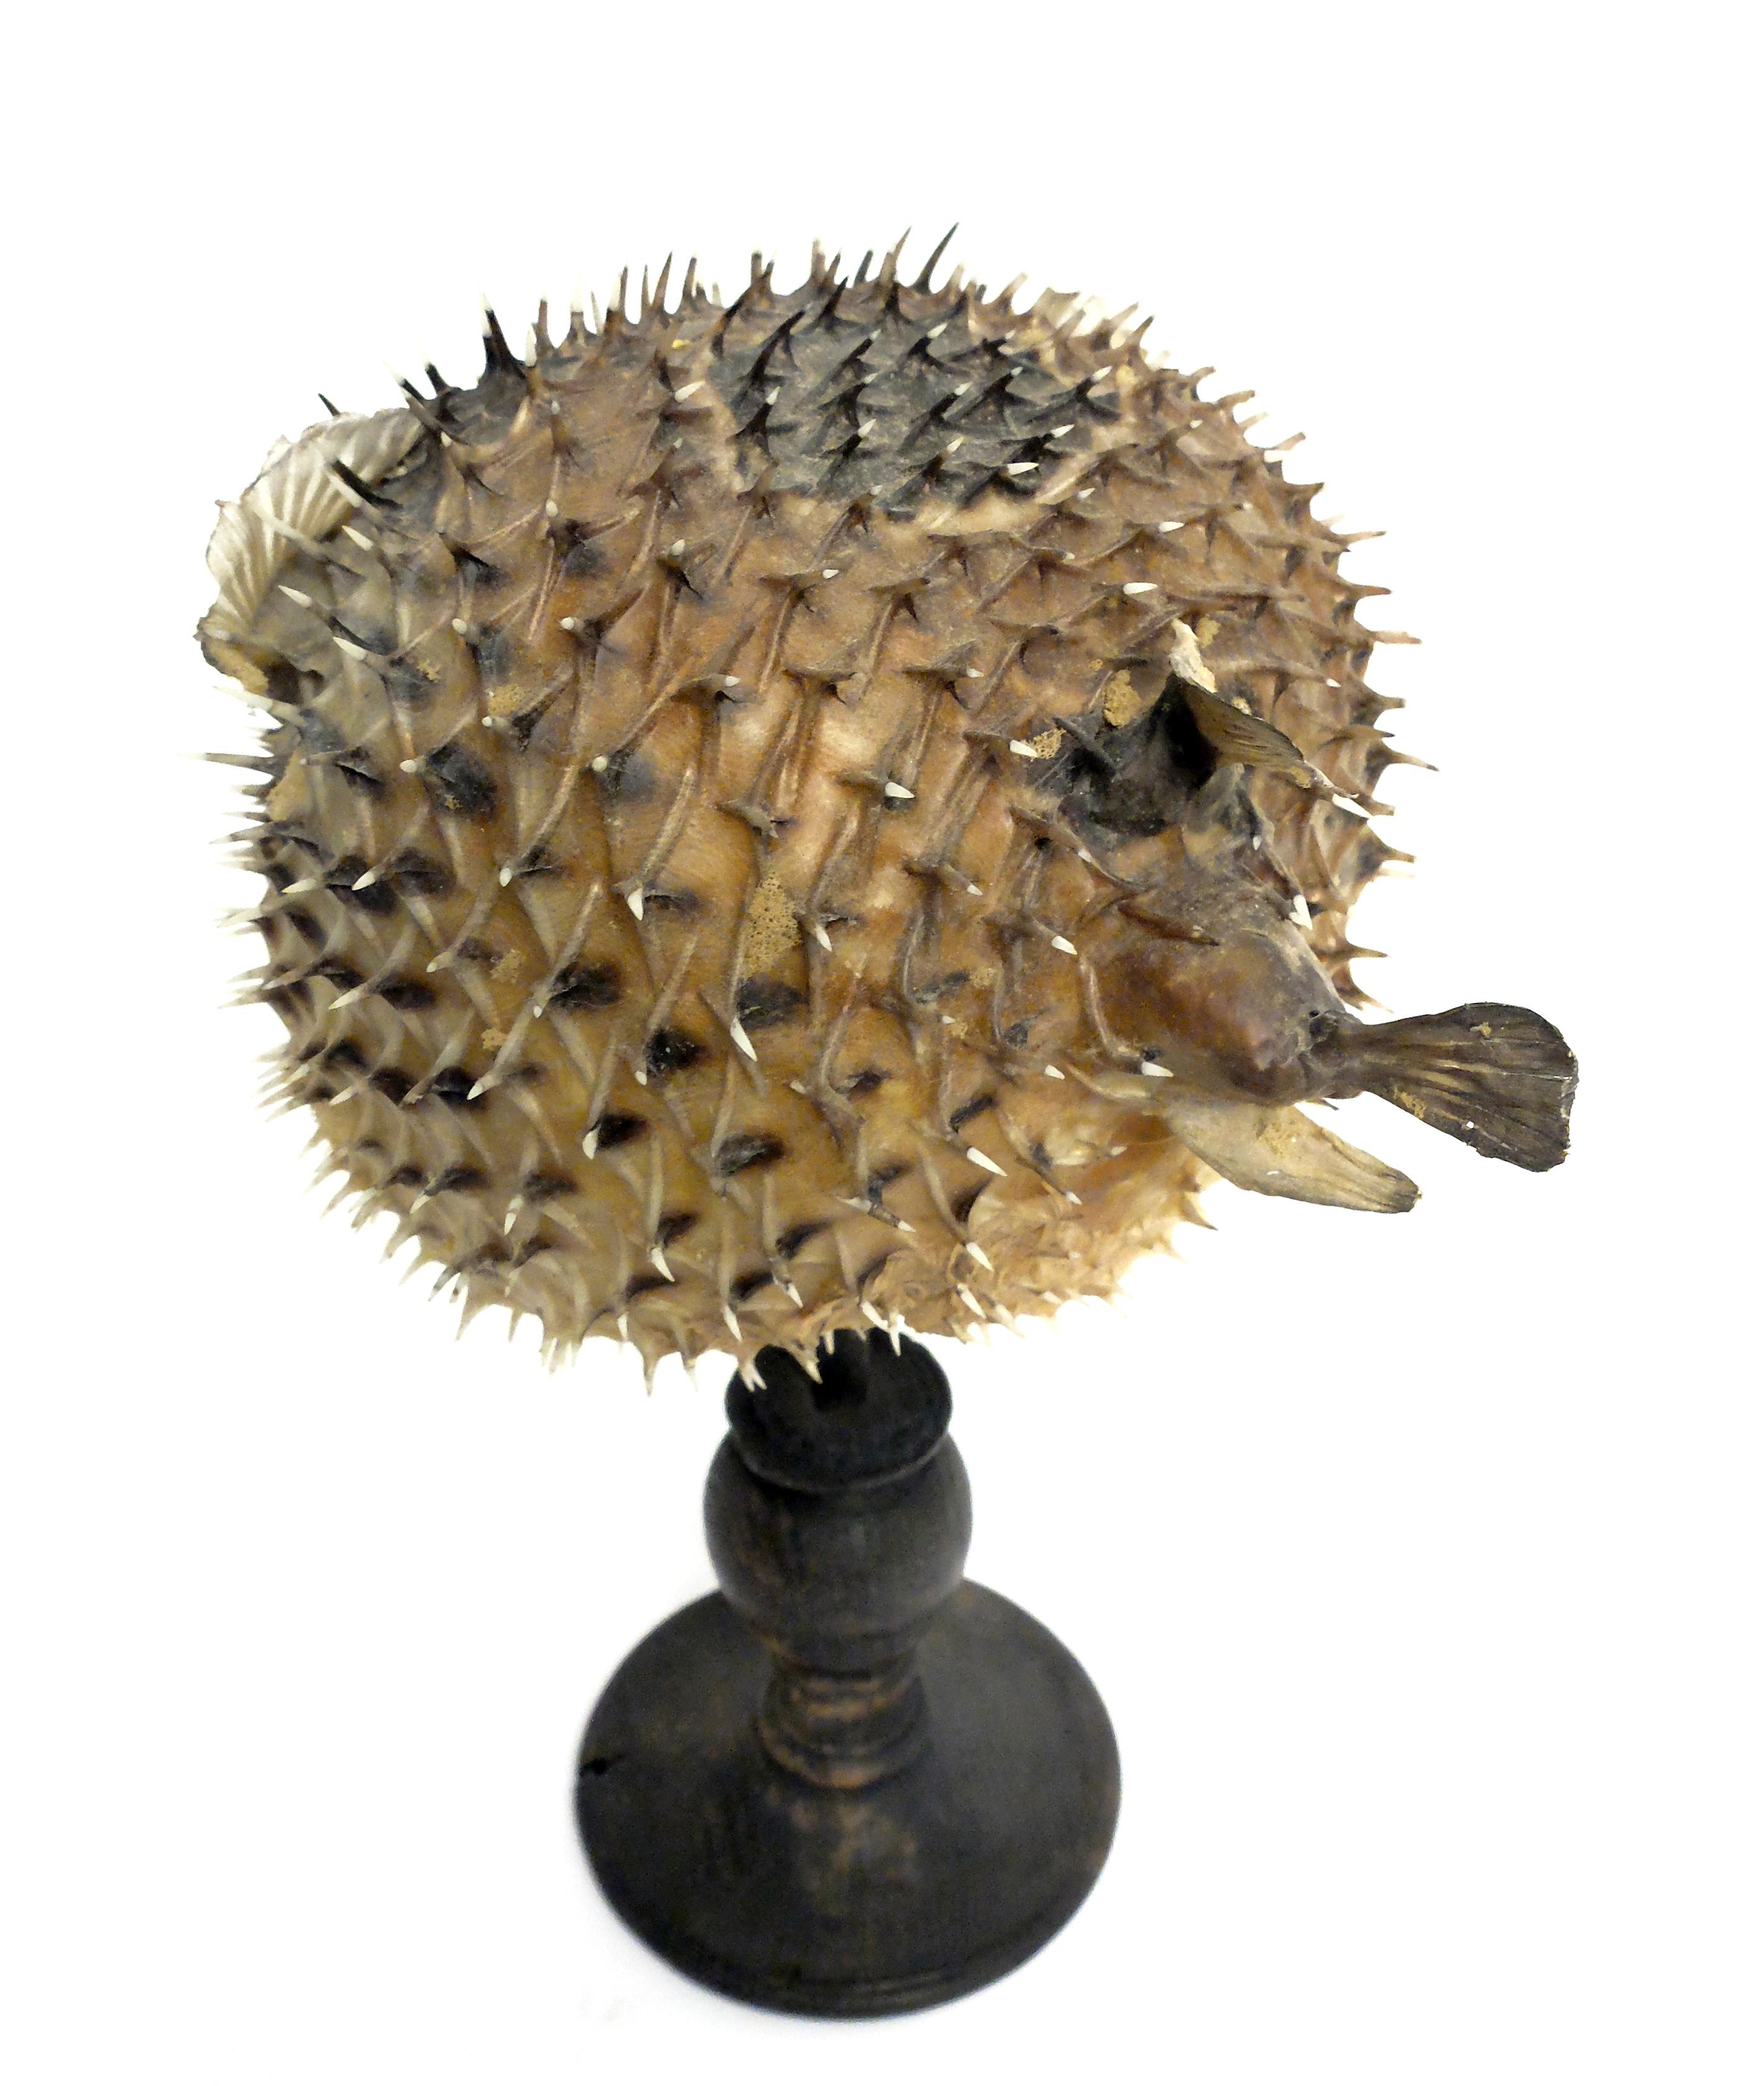 19th Century Wunderkammer Marine Natural Taxodermie Specimen of a Porcupine Fish 2